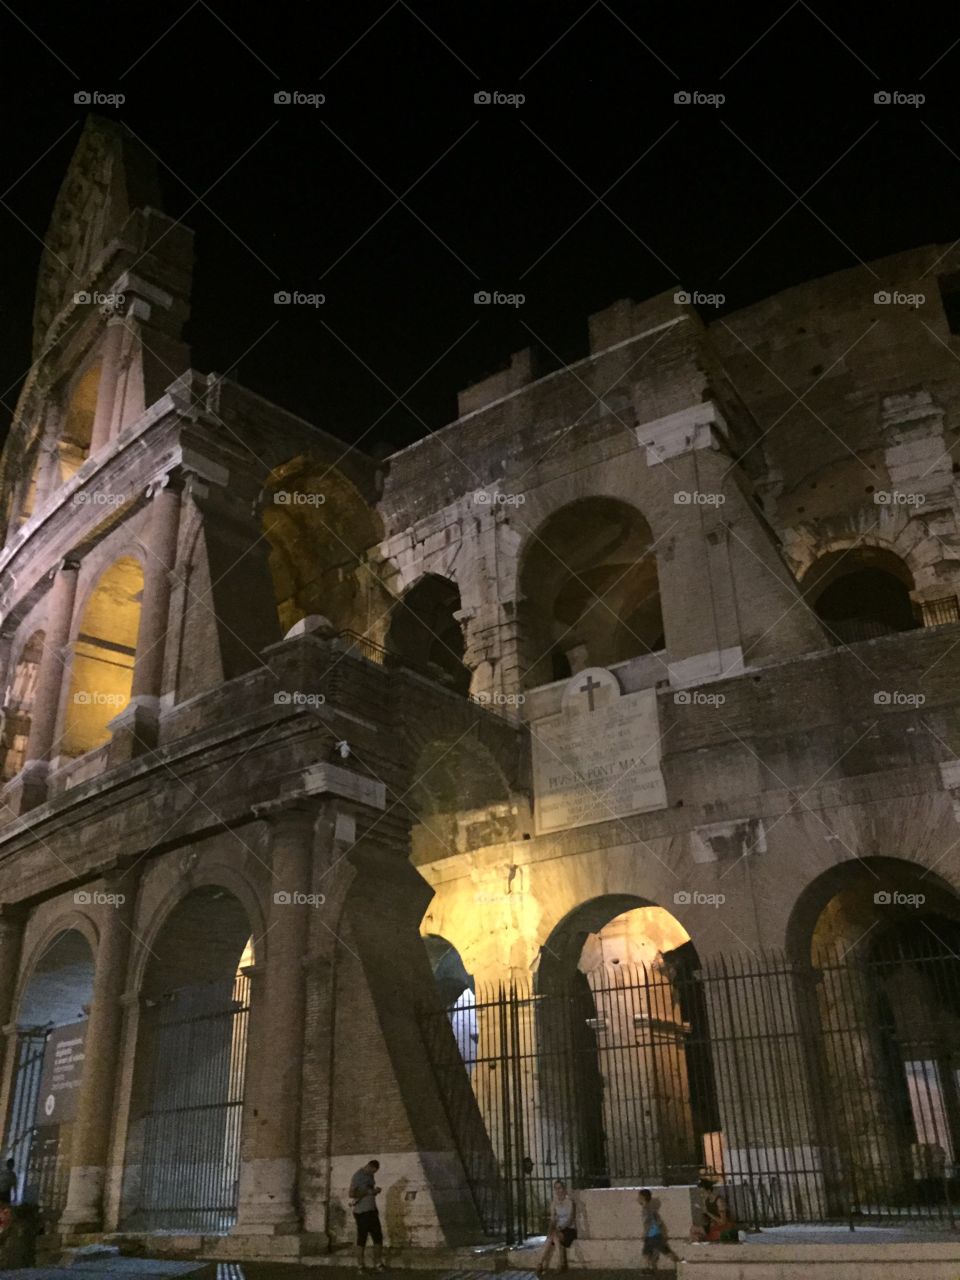 Il Colosseo in Roma, Italy